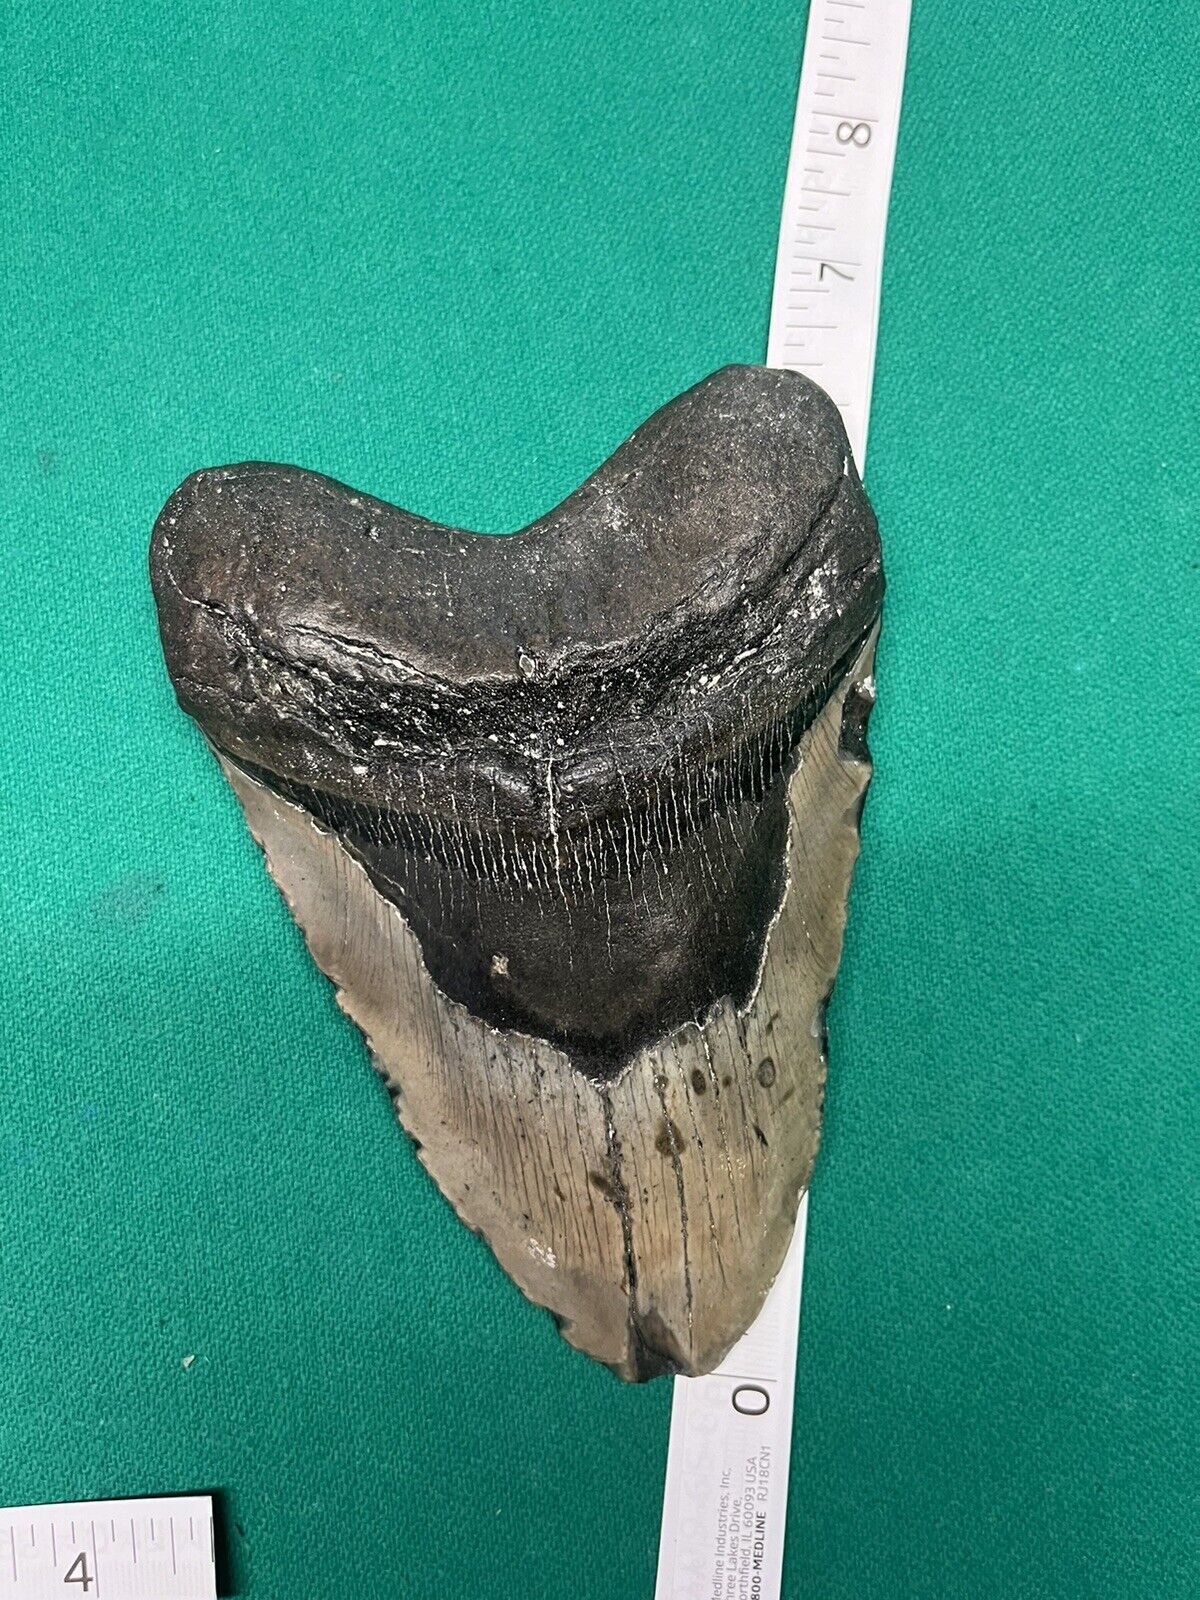 megalodon tooth 6-7 inches